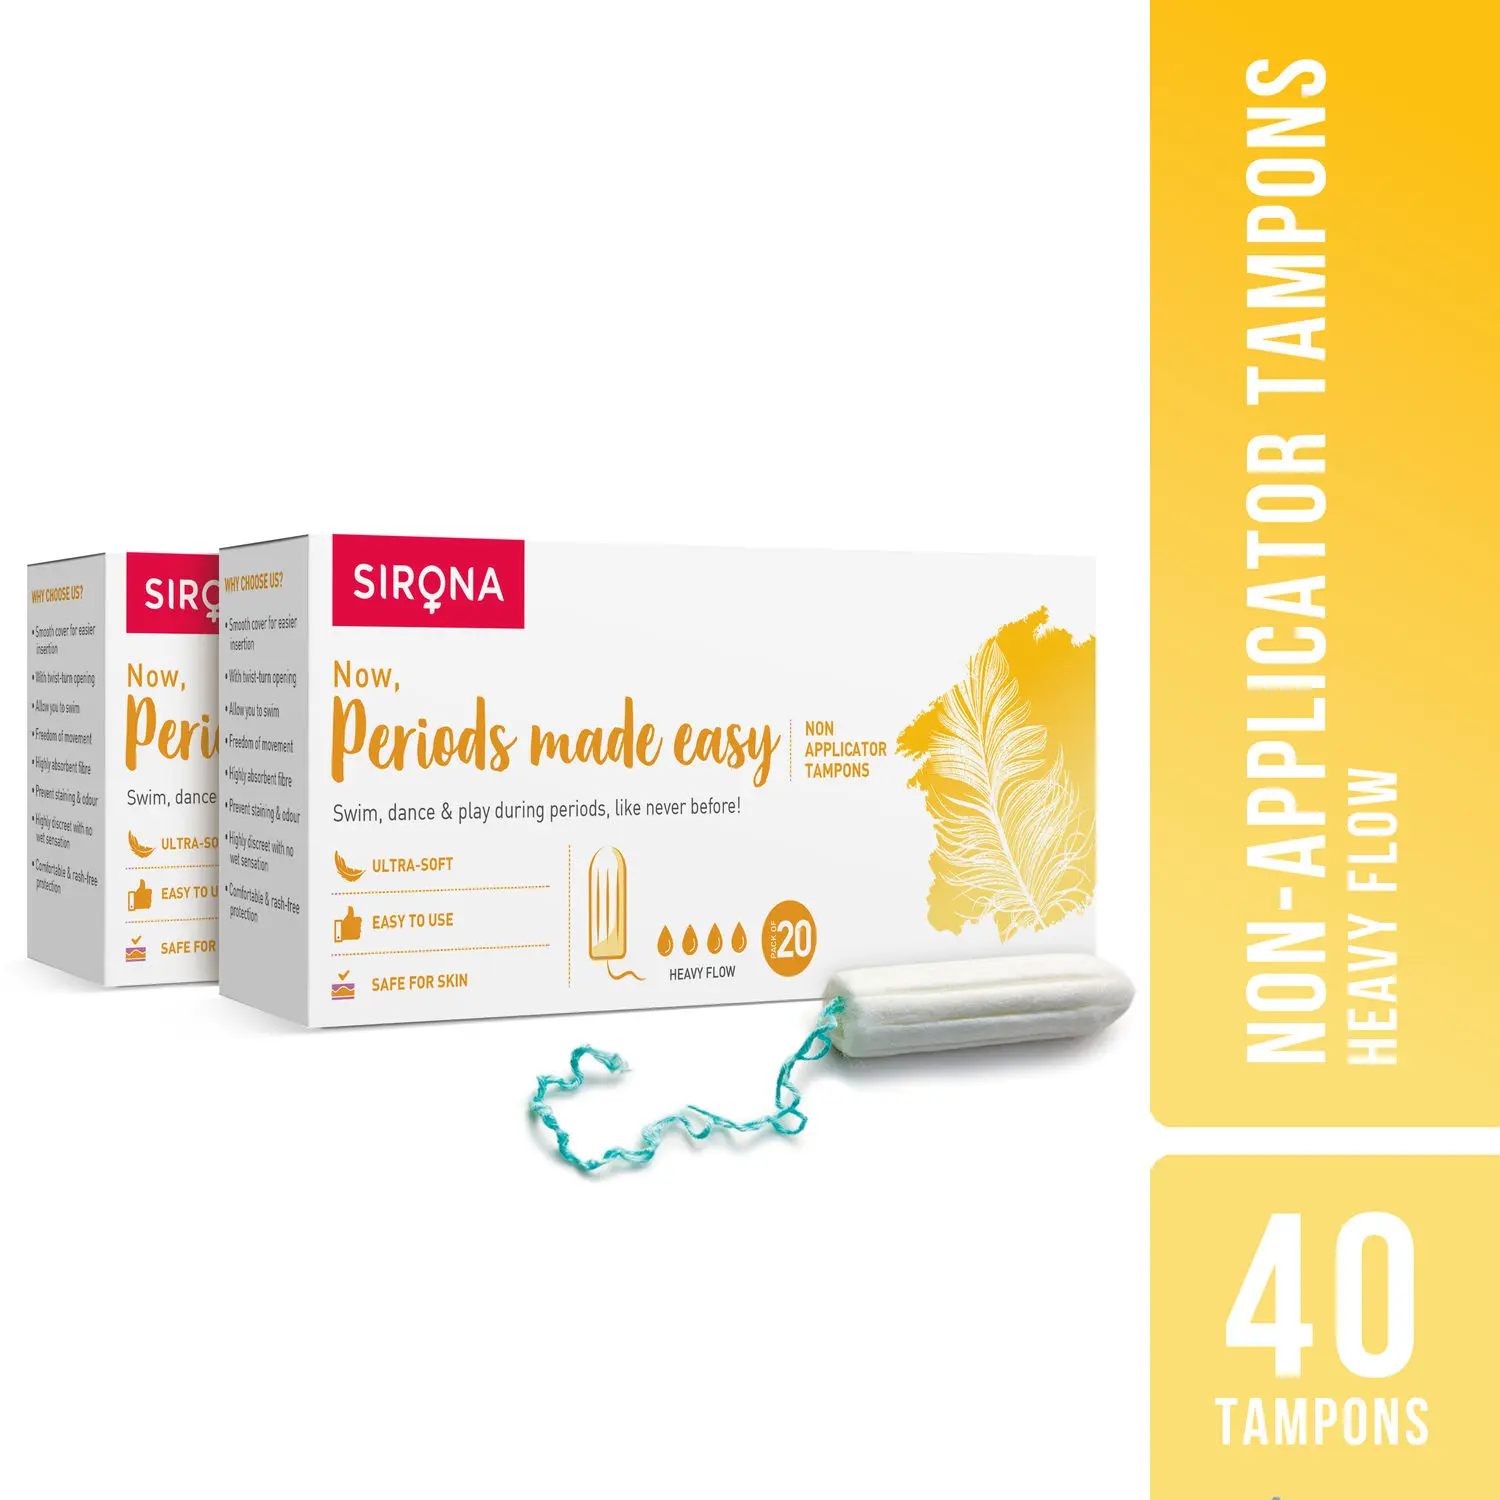 Sirona FDA Approved Premium Digital Tampon (Heavy Flow) - 40 Tampon (2 Pack - 20 Tampon Each)